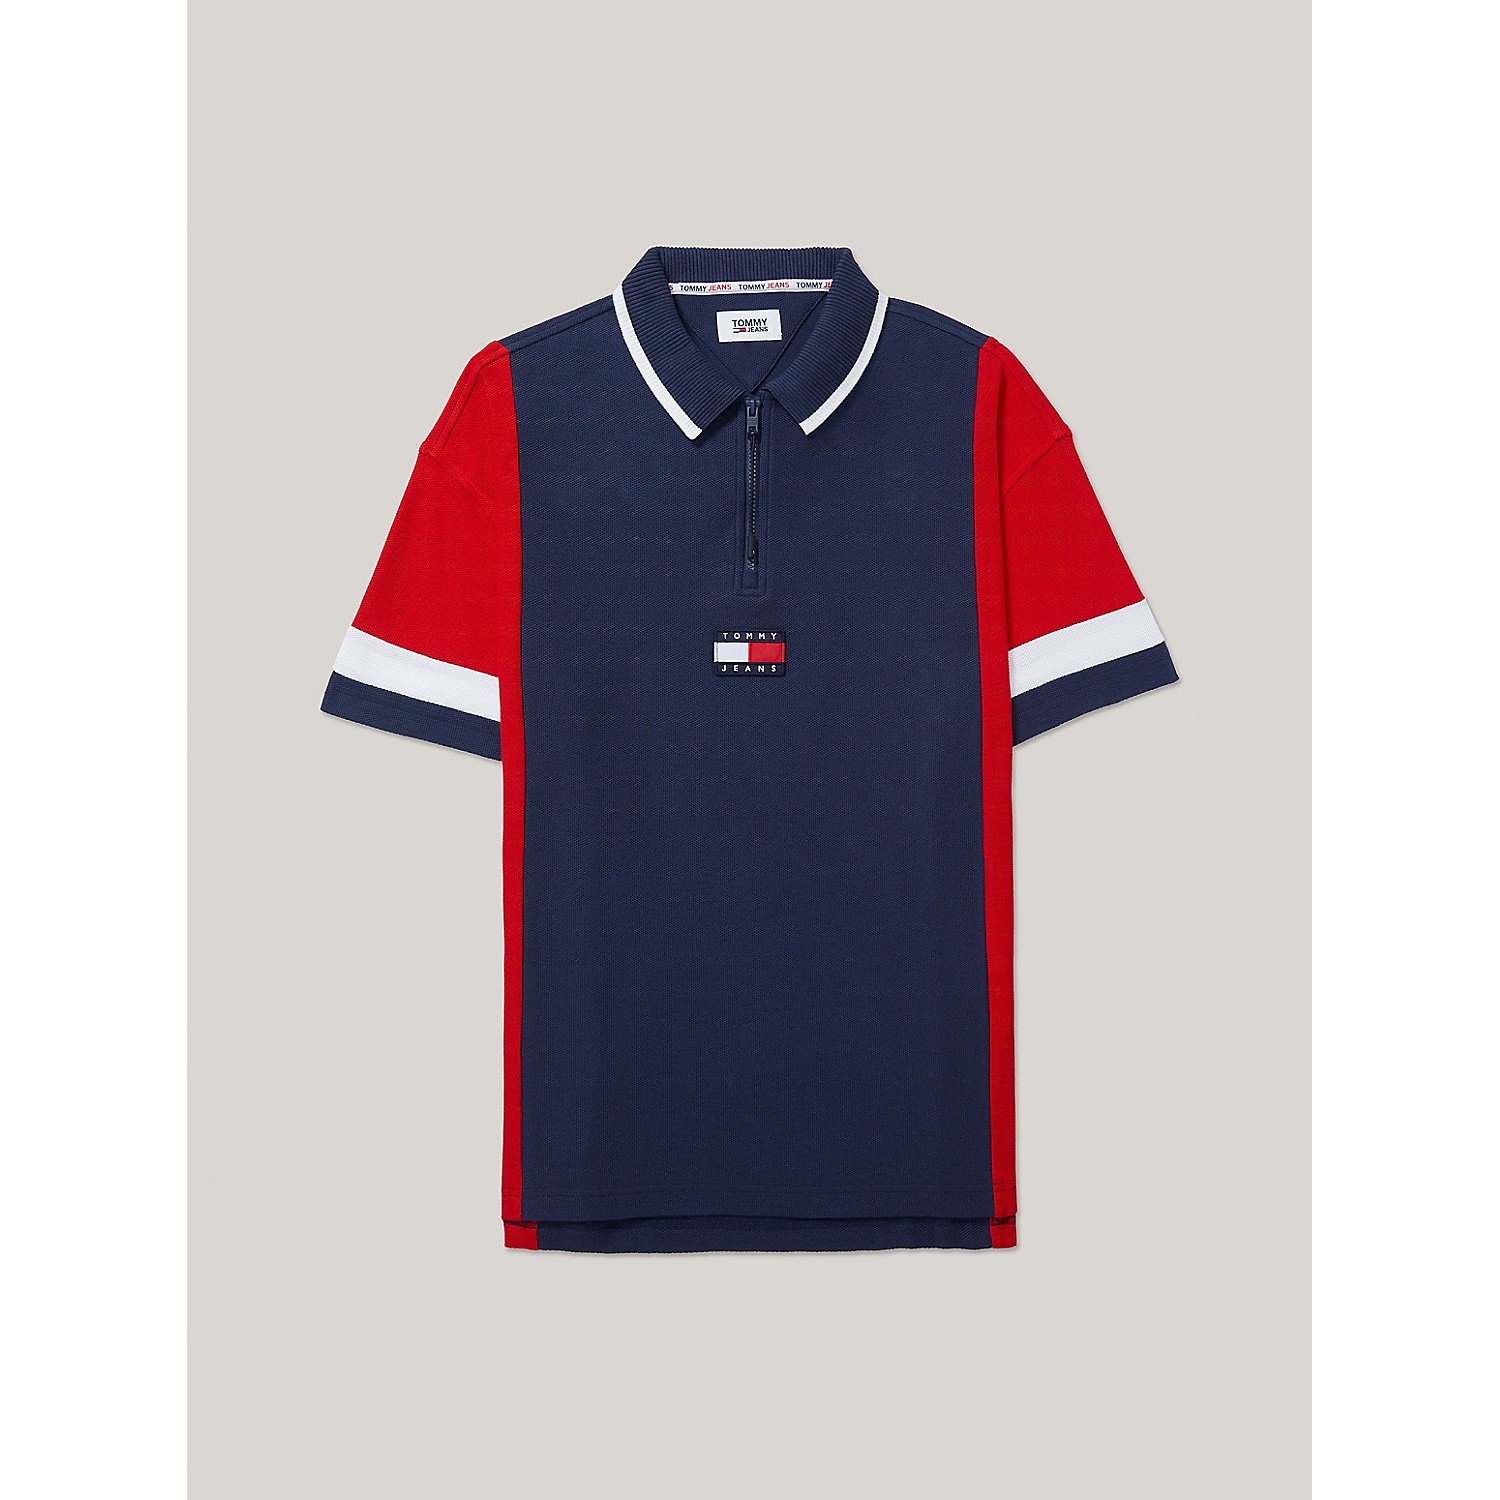 TOMMY HILFIGER Oversized Fit Zip Polo